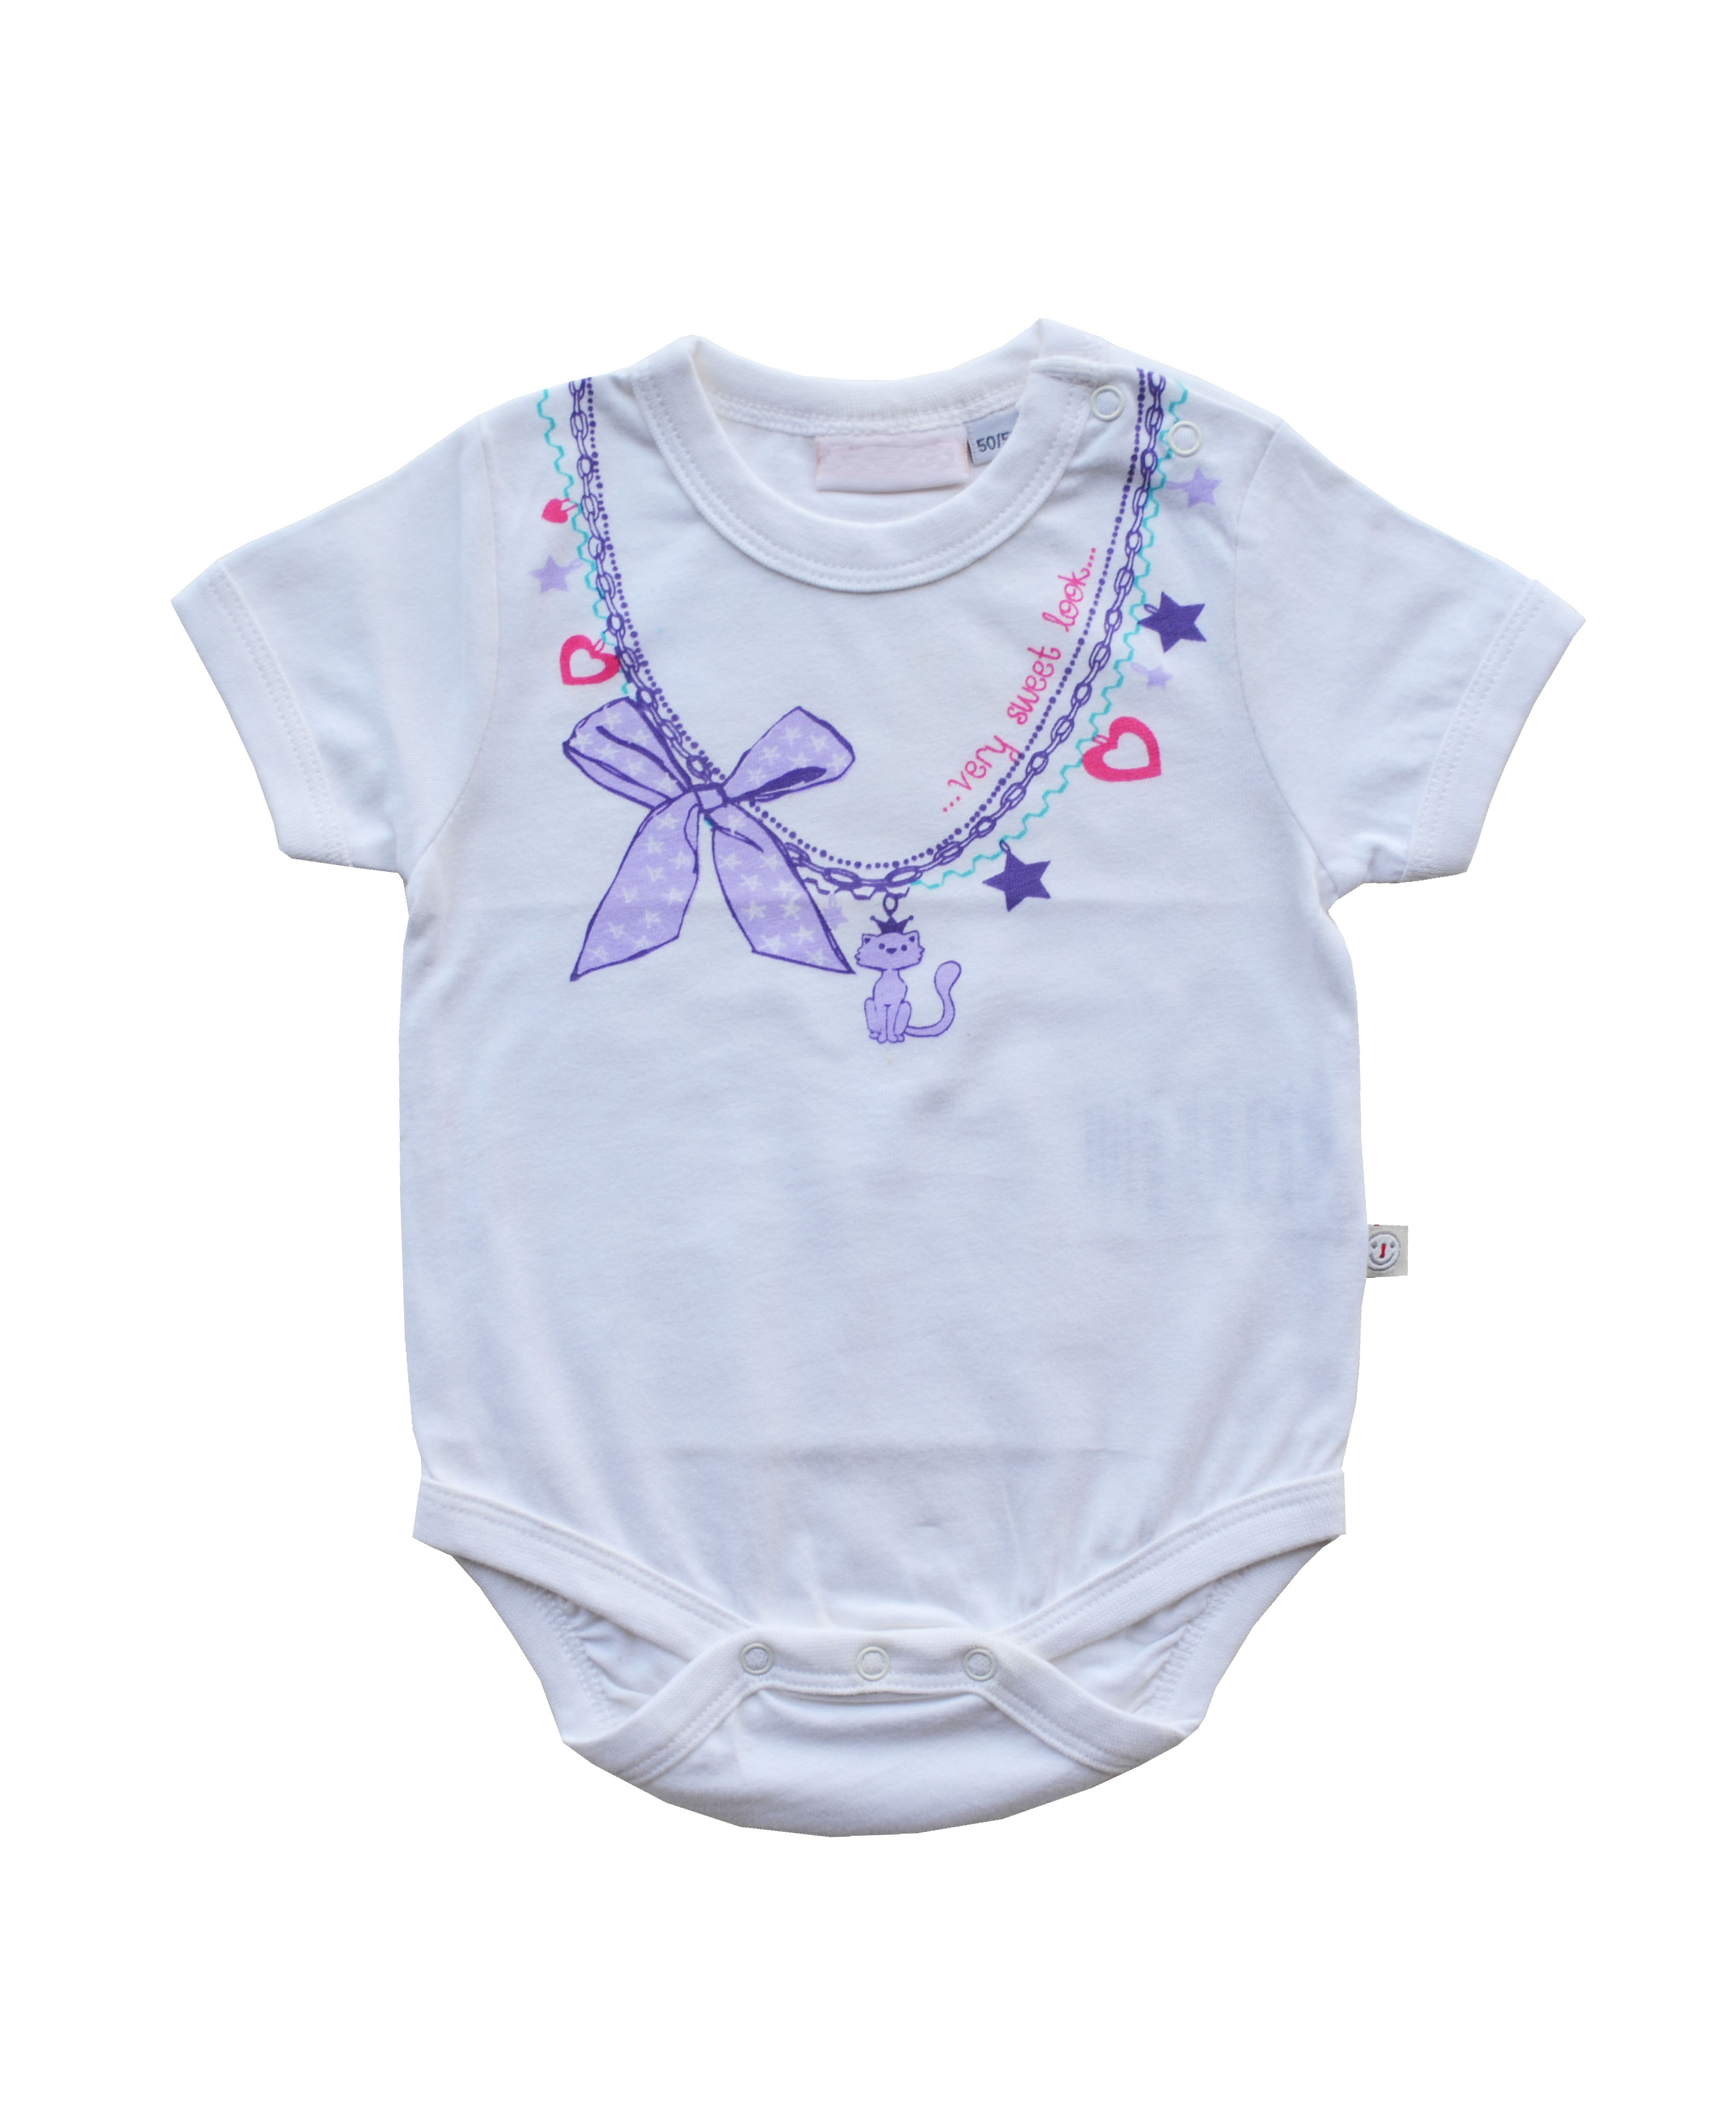 White Short Sleeve Romper/Onesie with Necklace Print (100% Cotton Single Jersey)